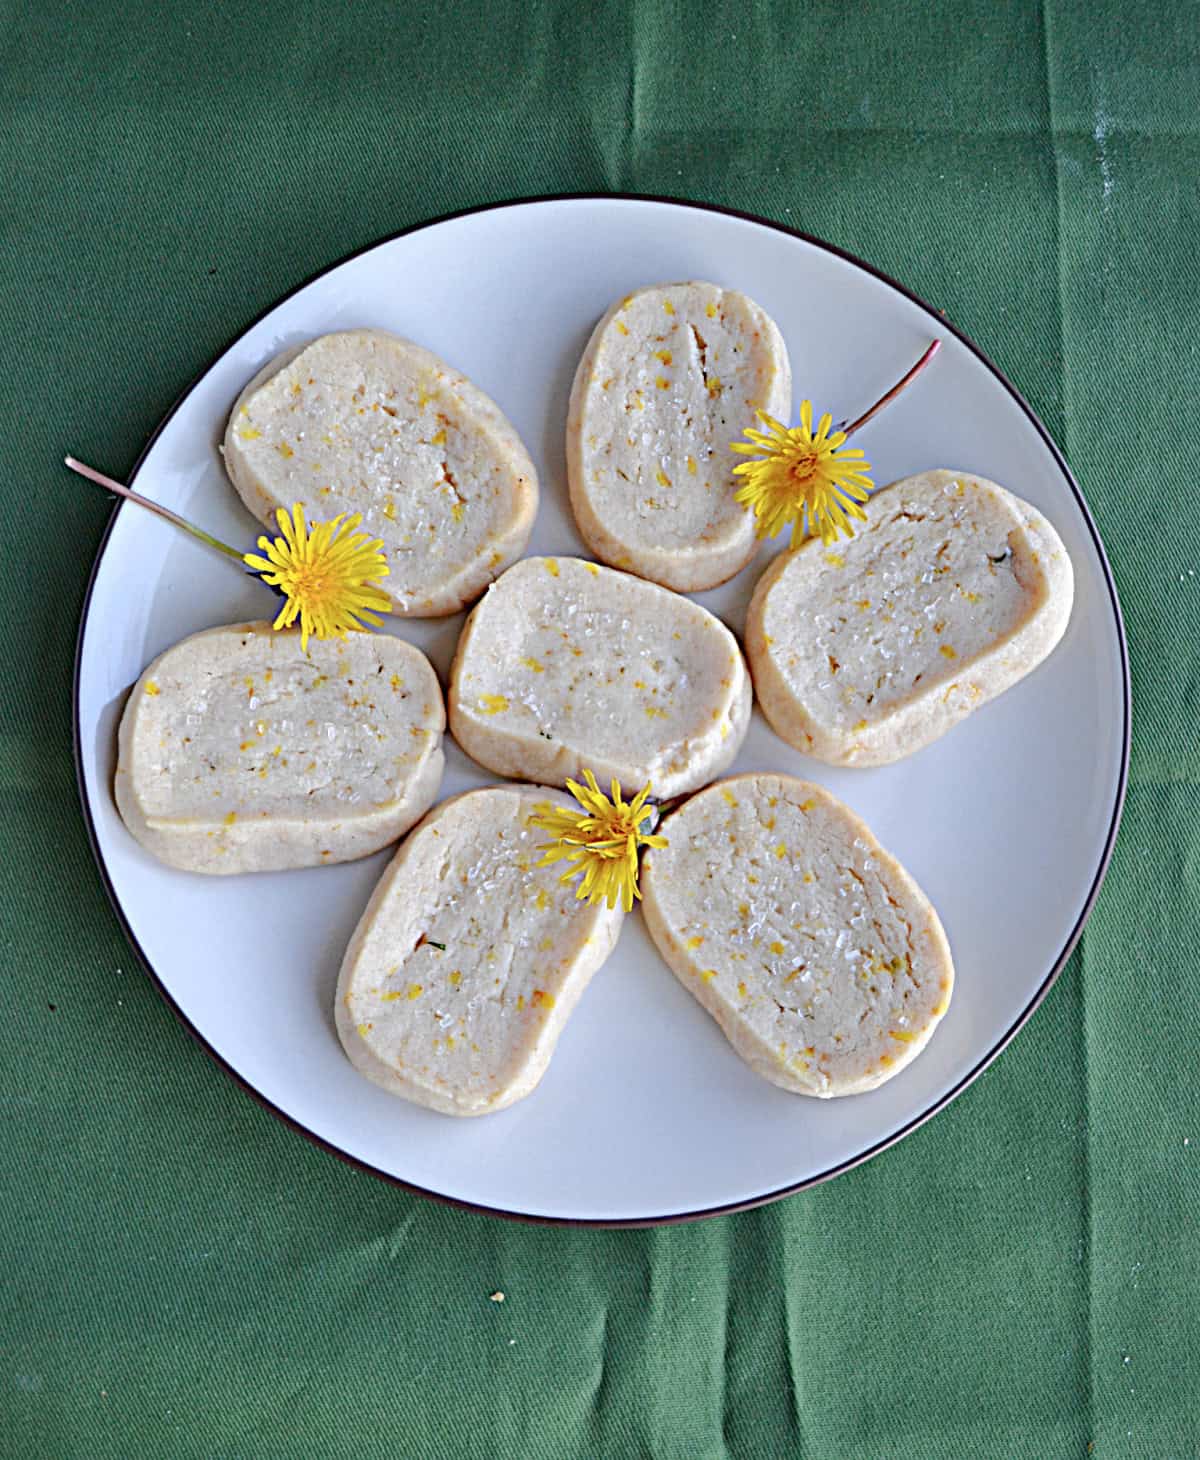 A plate of dandelion cookies with the dandelions on the plate.